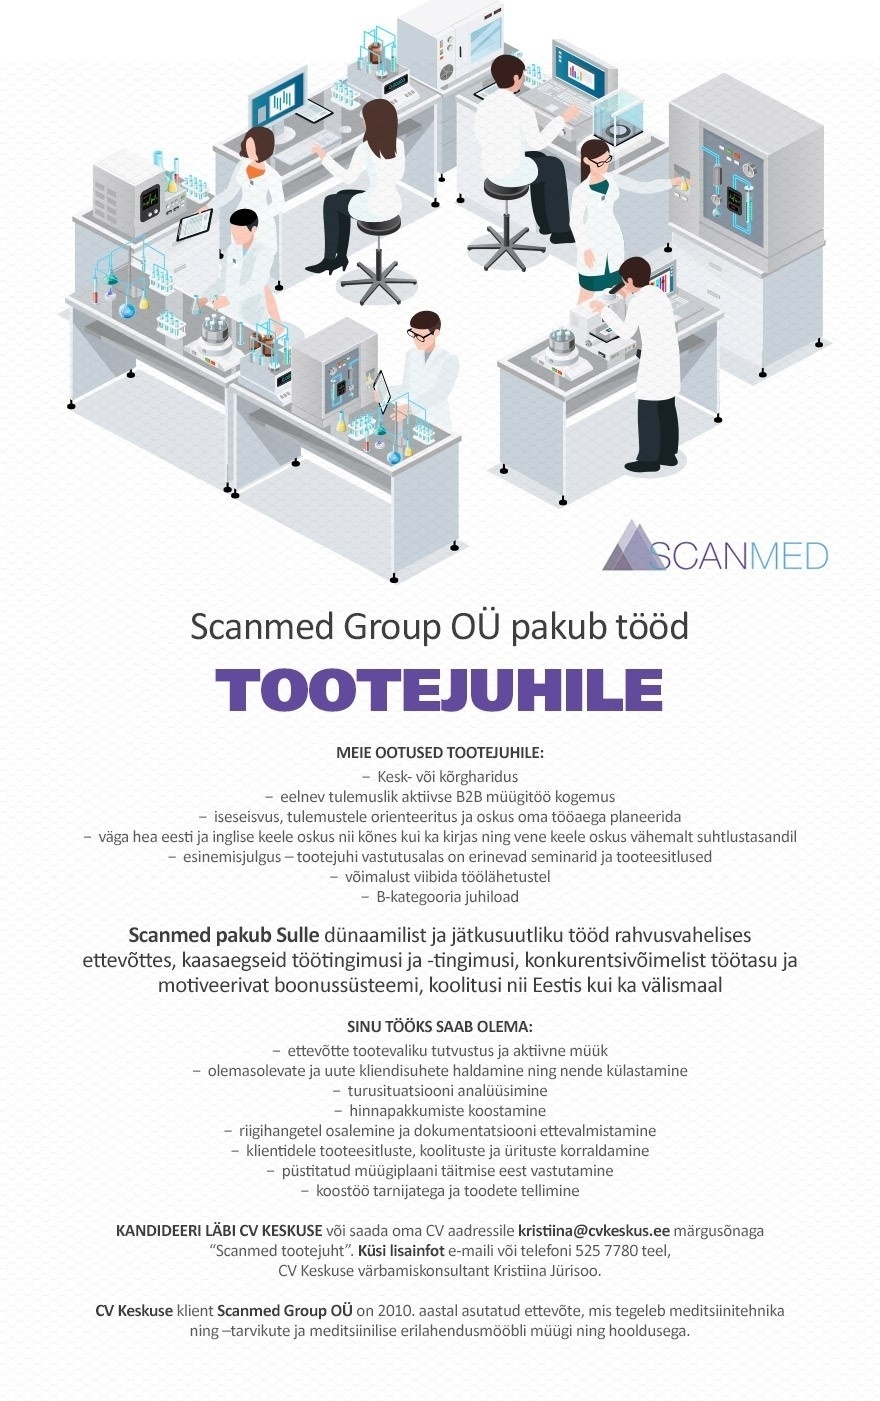 Scanmed Group OÜ Tootejuht (Scanmed Group OÜ)